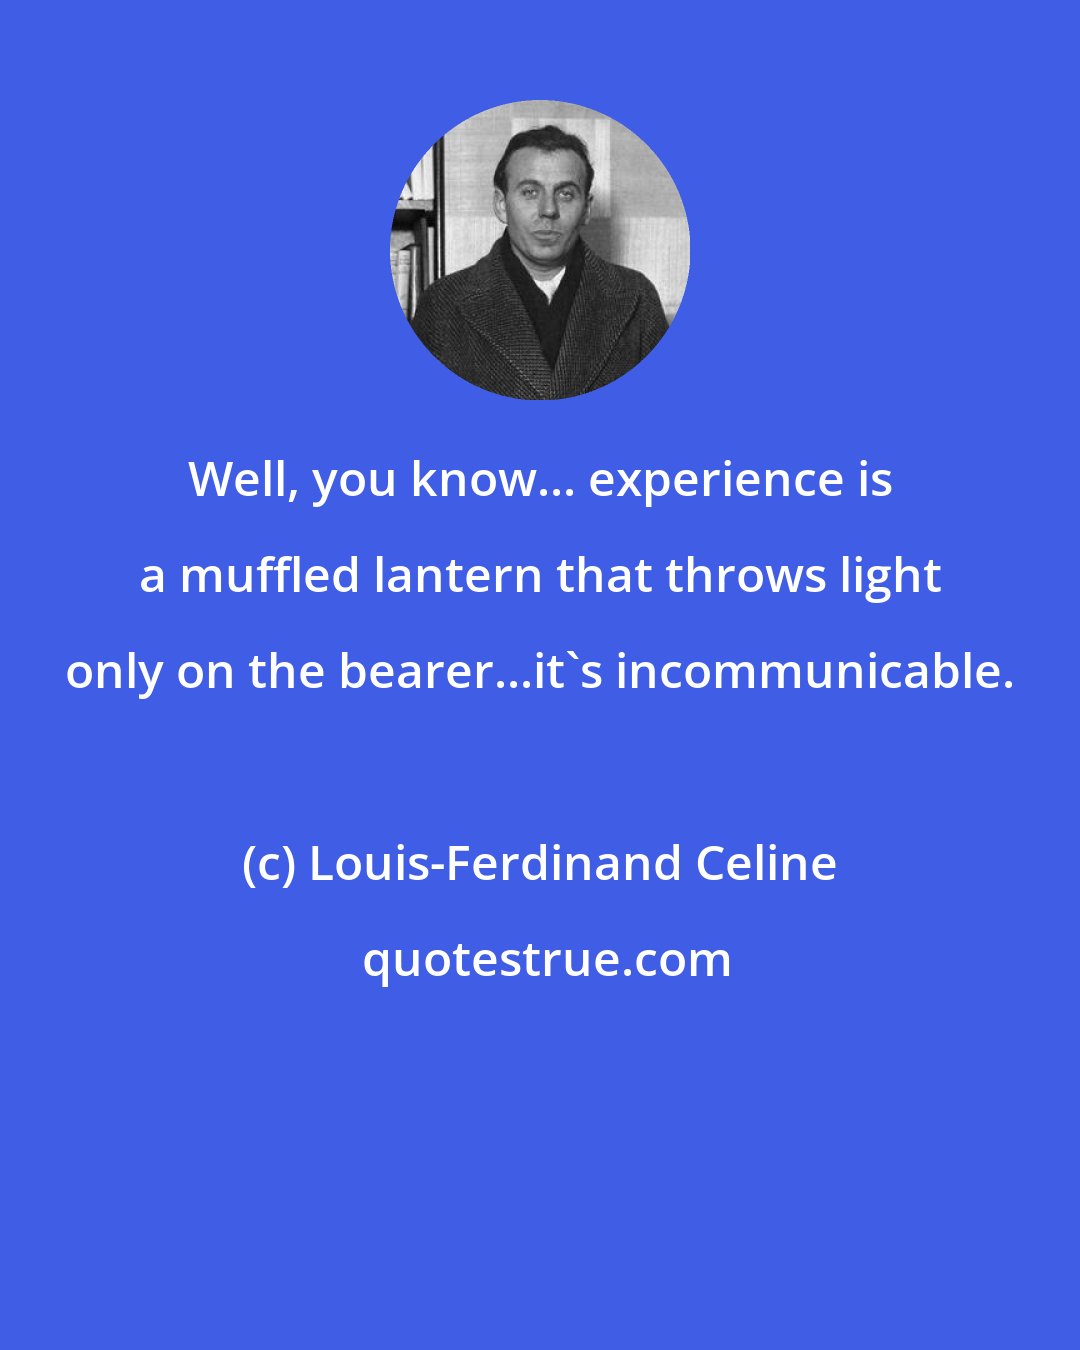 Louis-Ferdinand Celine: Well, you know... experience is a muffled lantern that throws light only on the bearer...it's incommunicable.